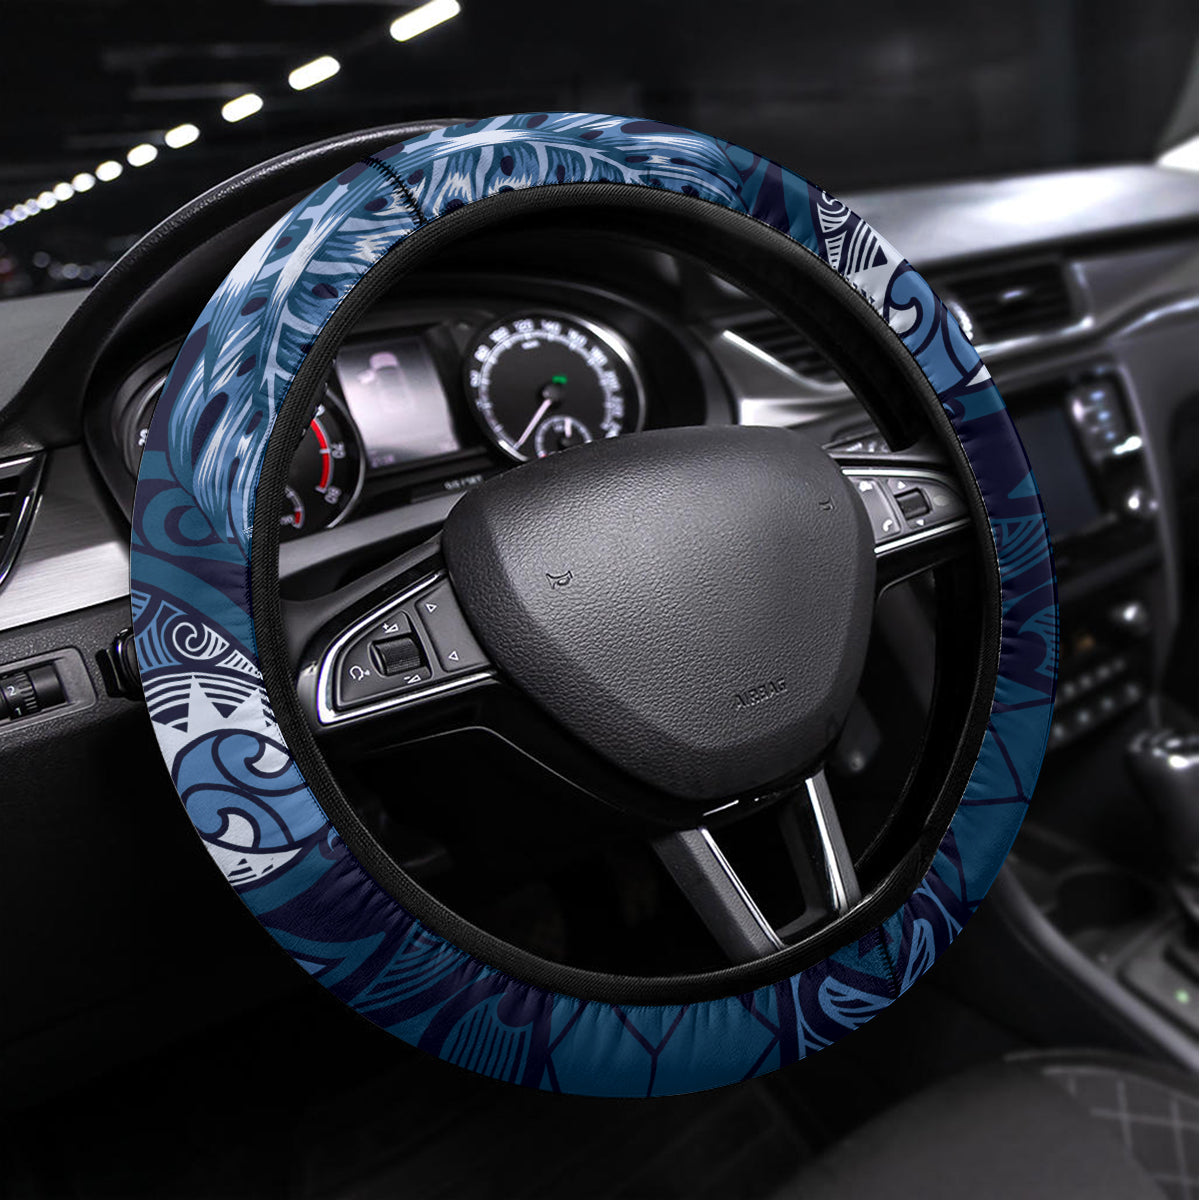 Father's Day Polynesian Pattern Steering Wheel Cover Tropical Humpback Whale - Navy